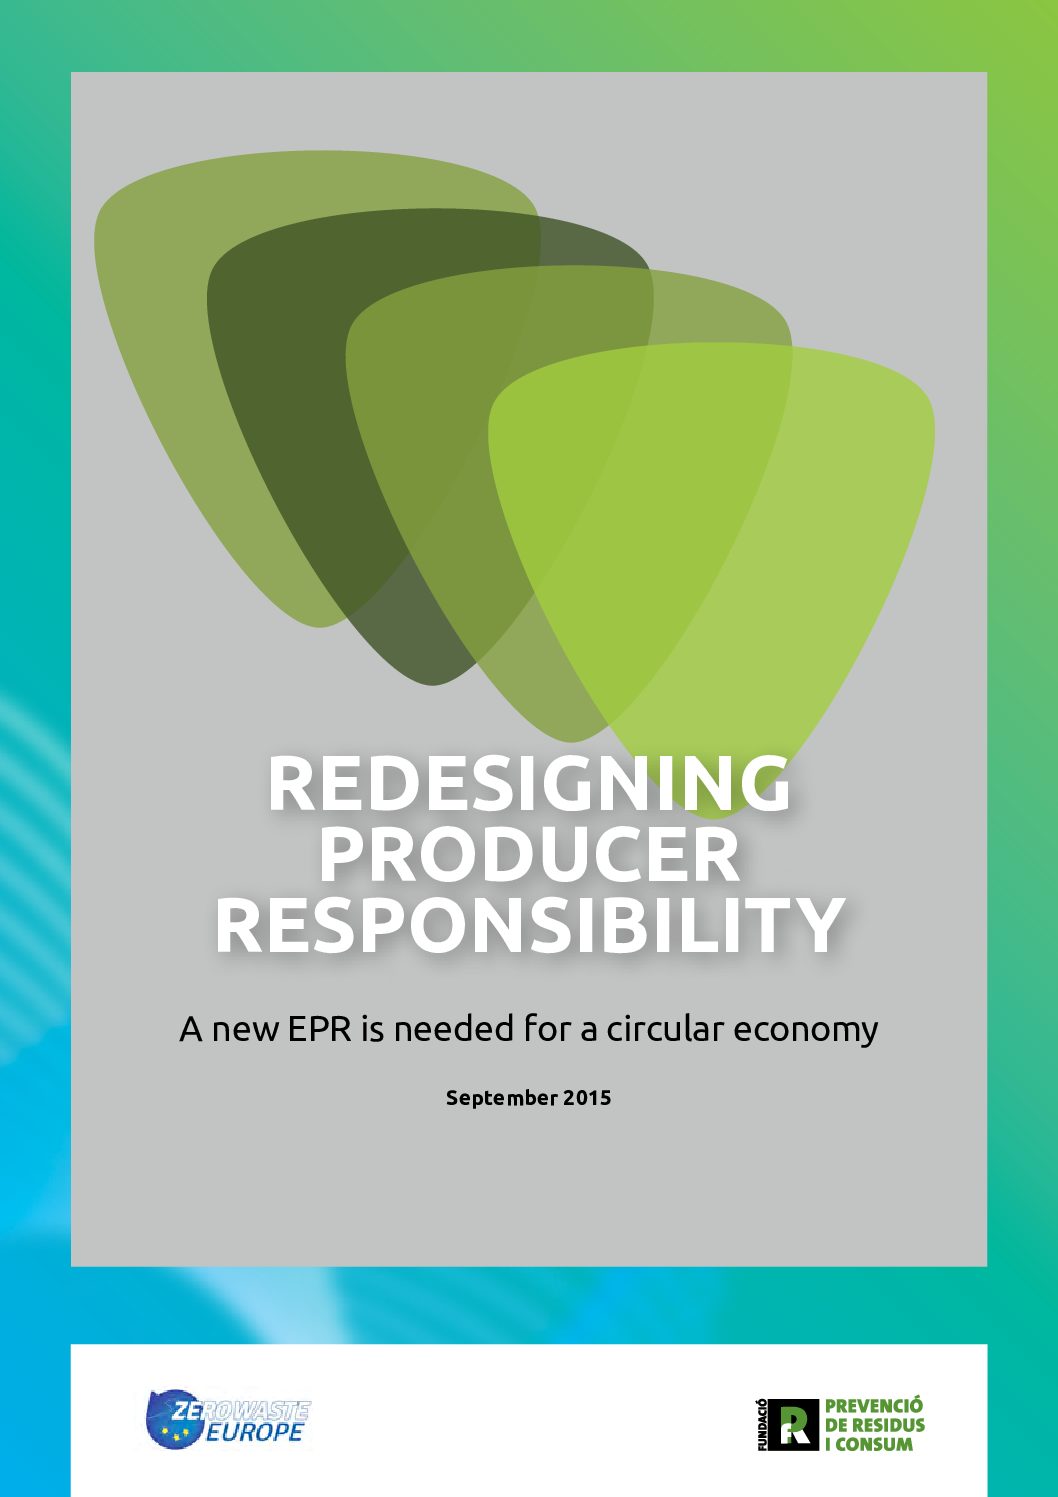 Redesigning Producer Responsibility: A new EPR is needed for a circular economy